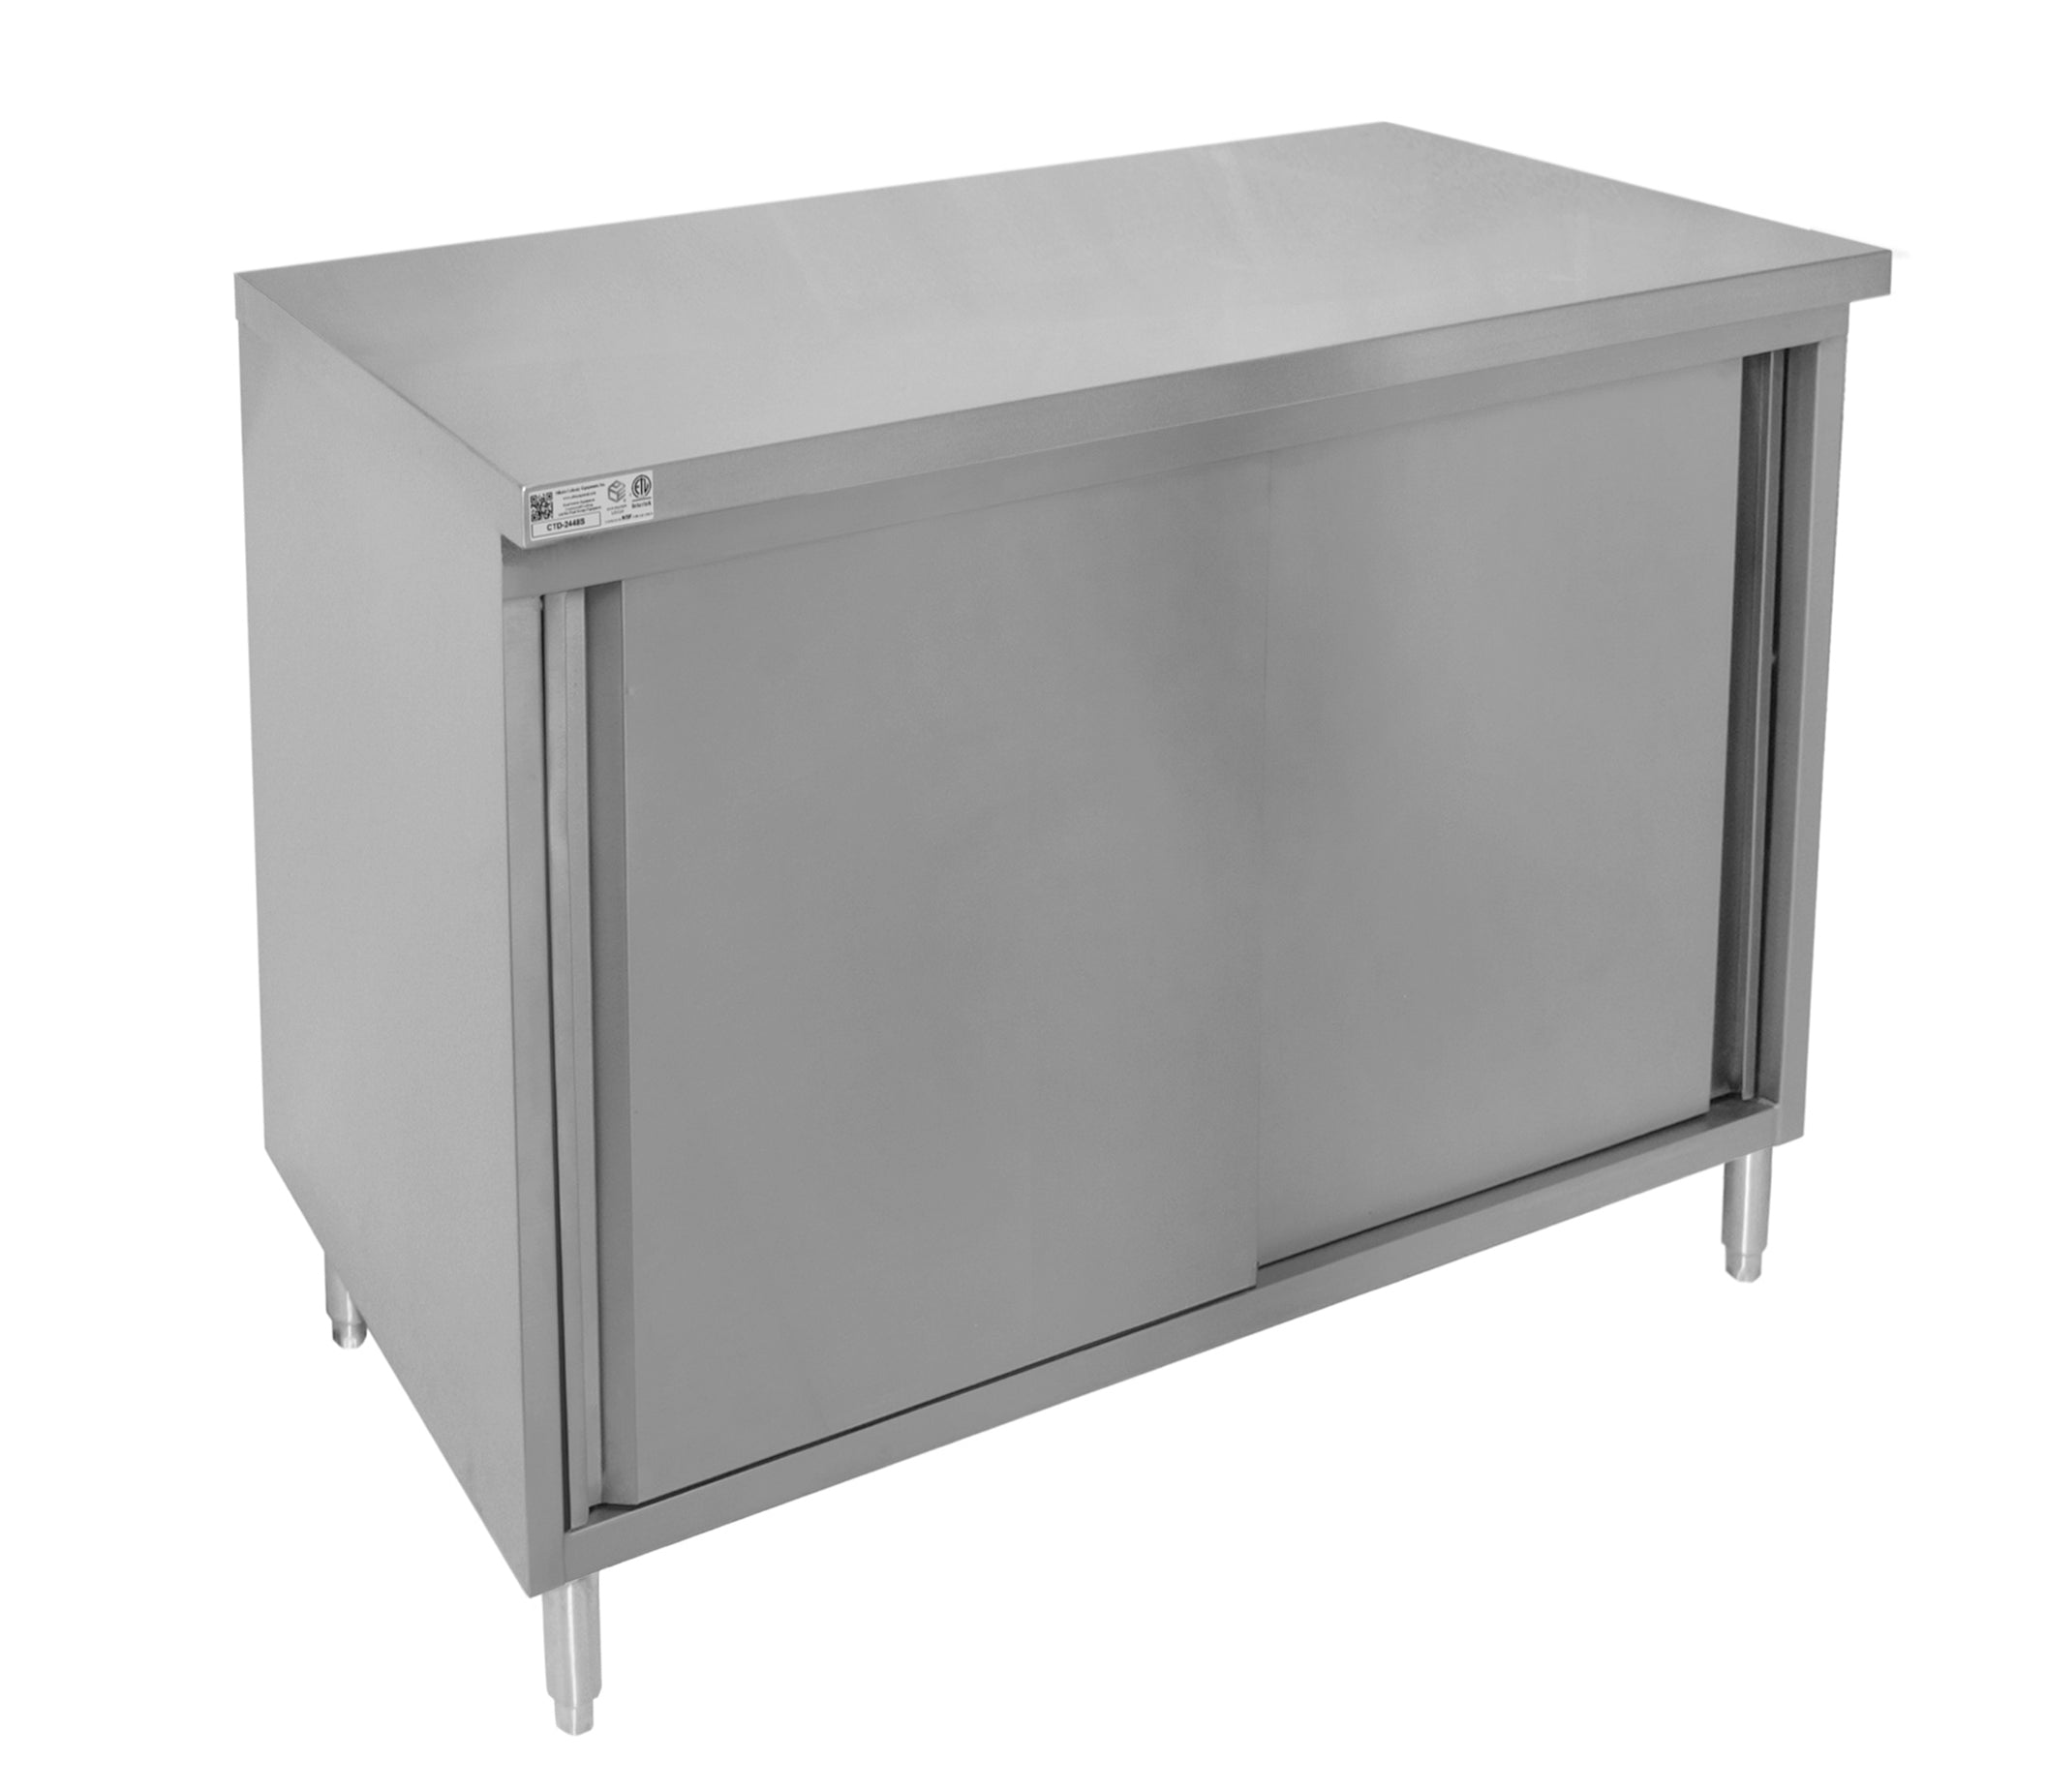 GSW 18 Gauge Flat Top All Stainless Steel Cabinet Enclosed Work Table w/Sliding Door 24"(W) x 36"(L) x 35"(H)